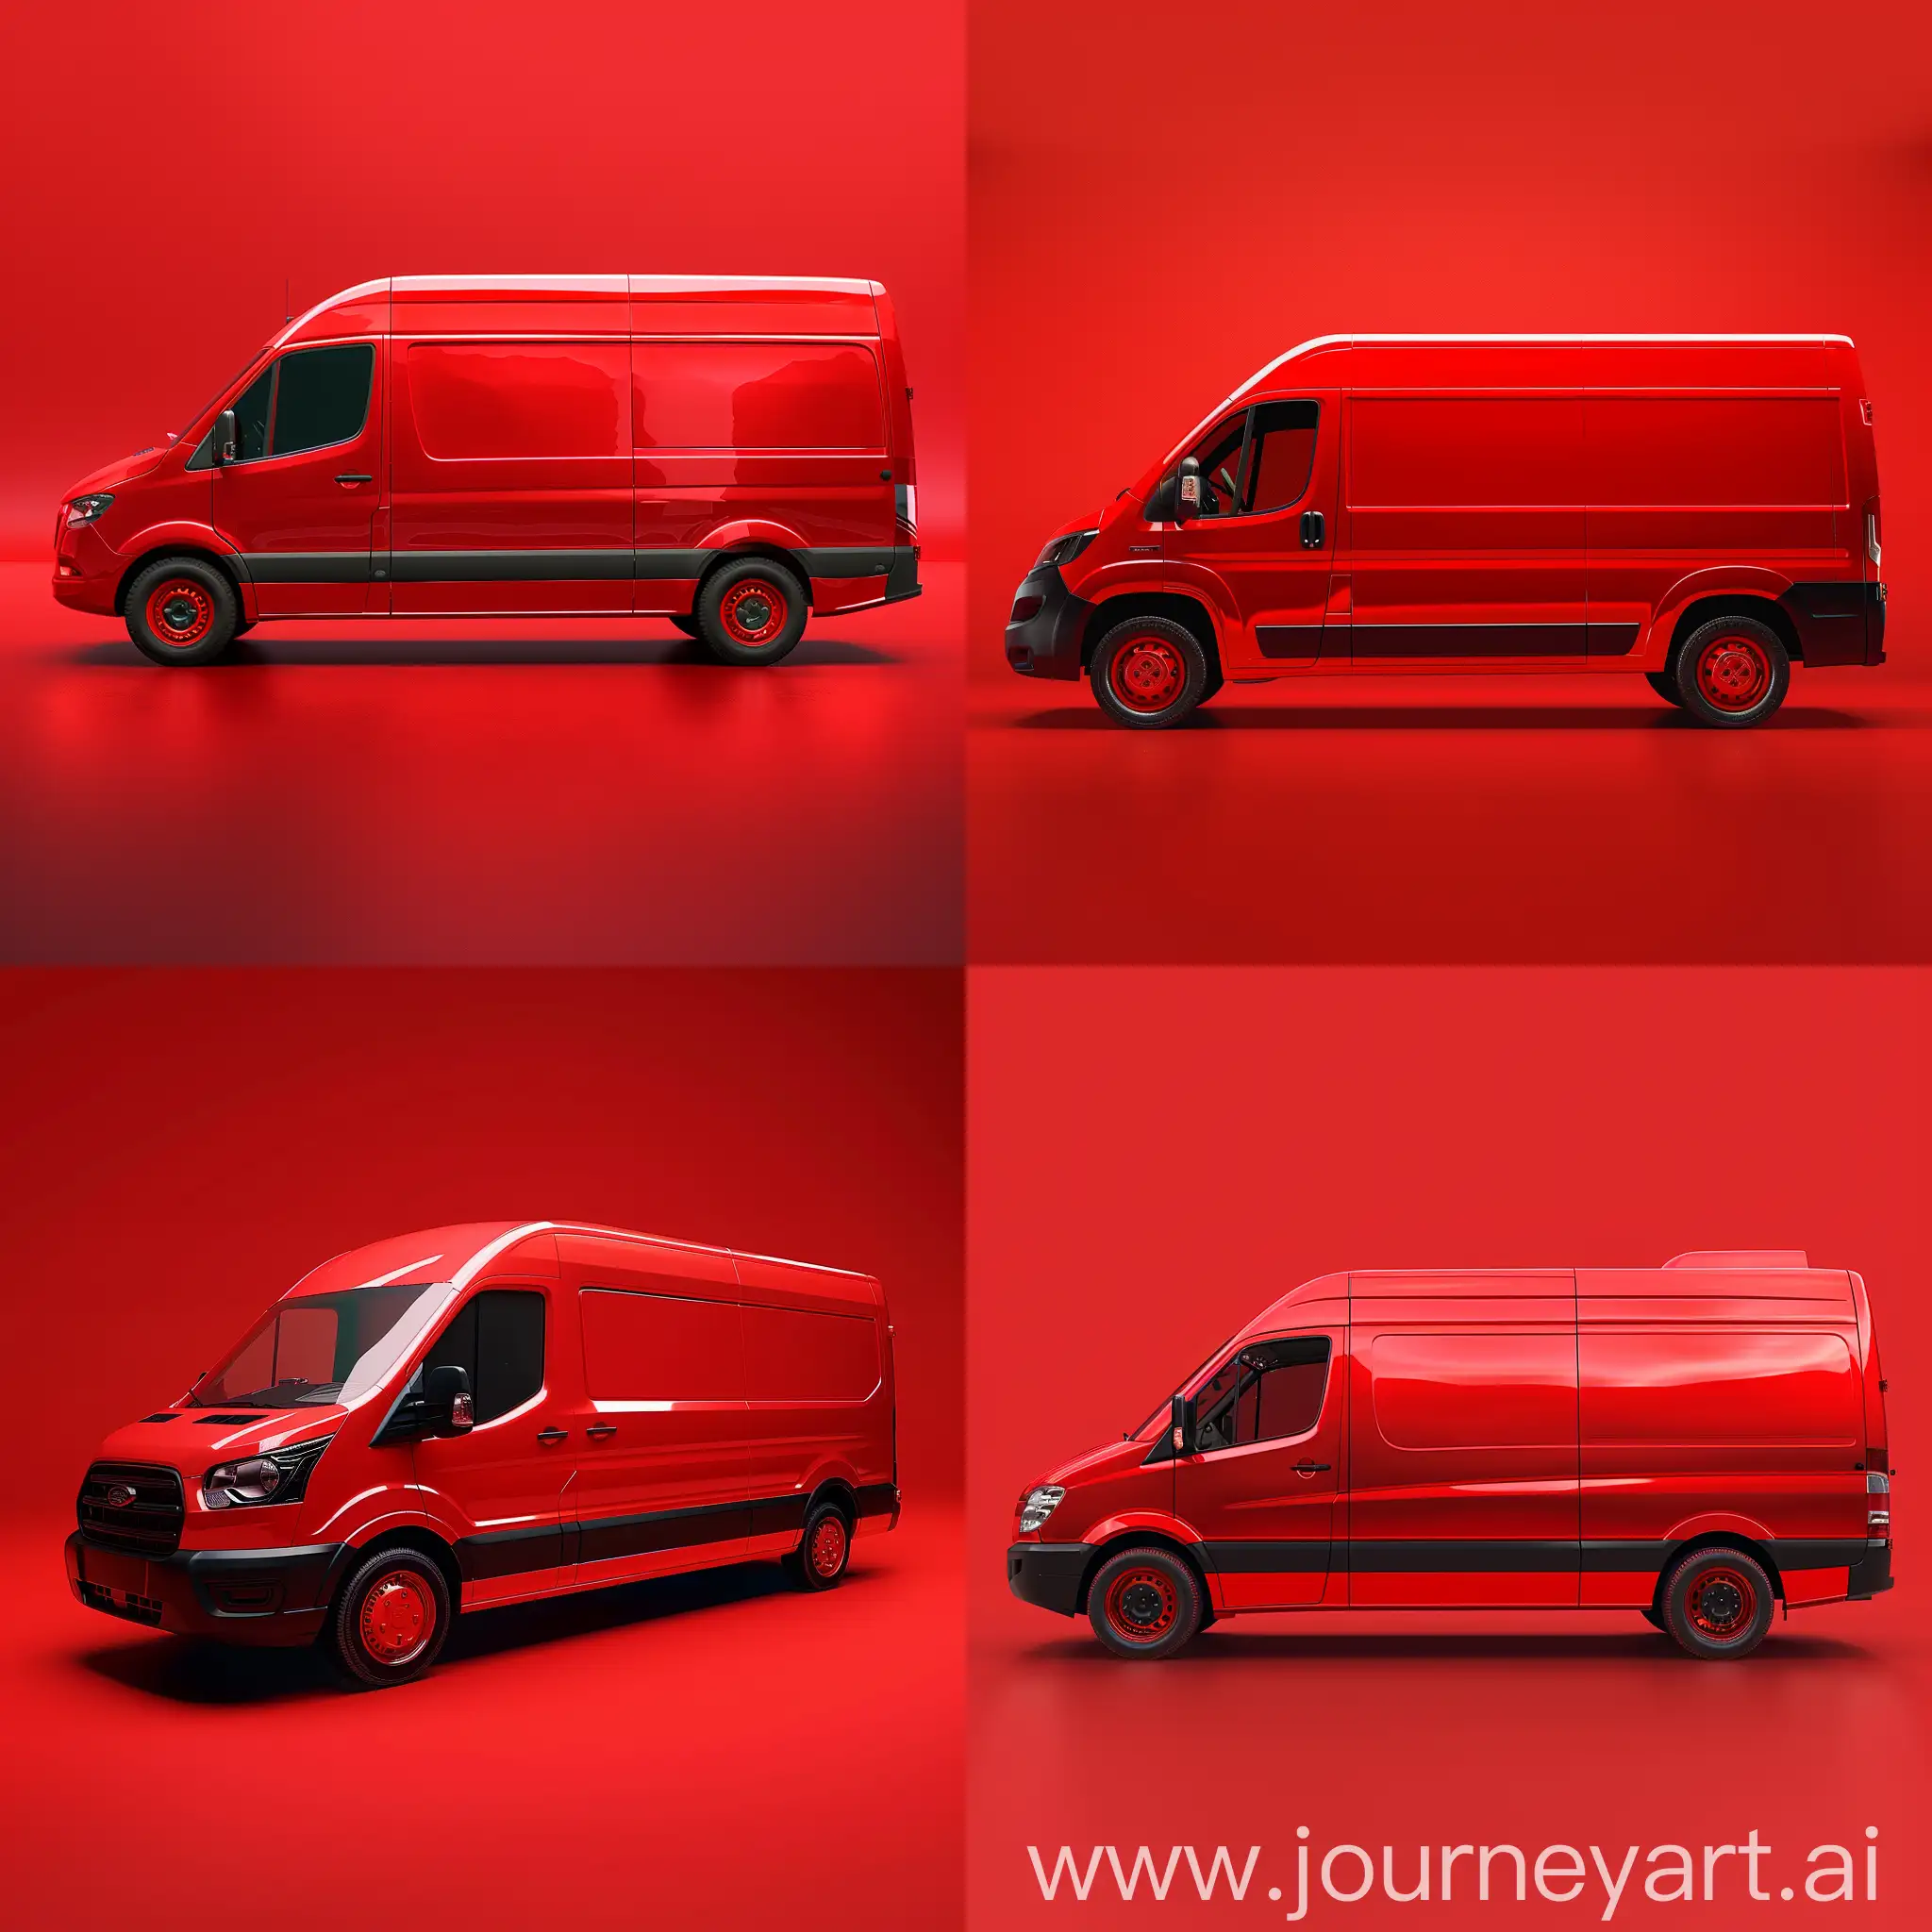 Bright-Red-Cargo-Van-Modern-Commercial-Delivery-Vehicle-on-Solid-Red-Background